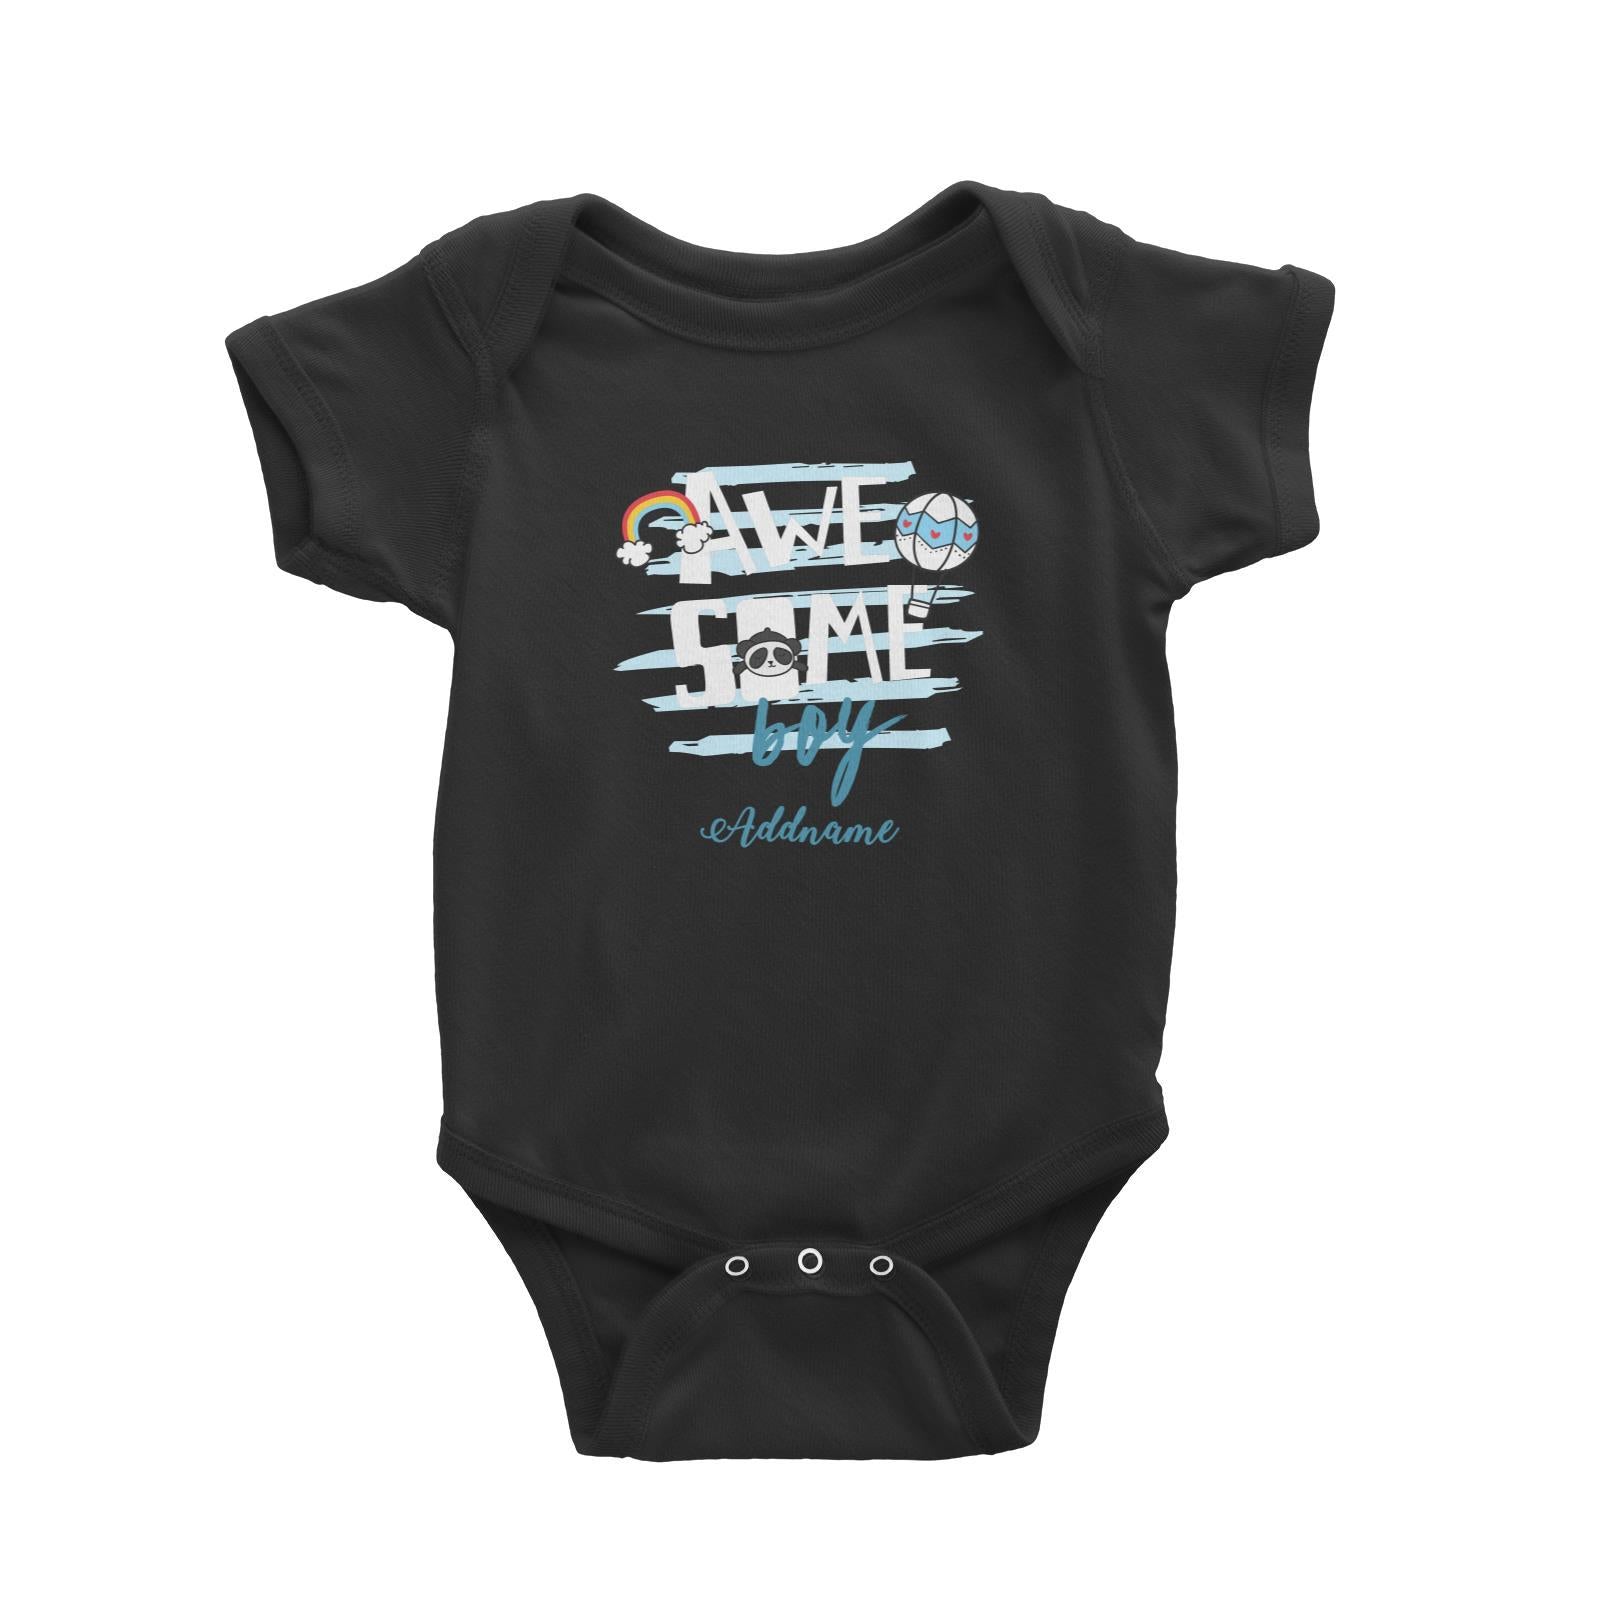 Awesome Boy with Panda Elements Addname Baby Romper